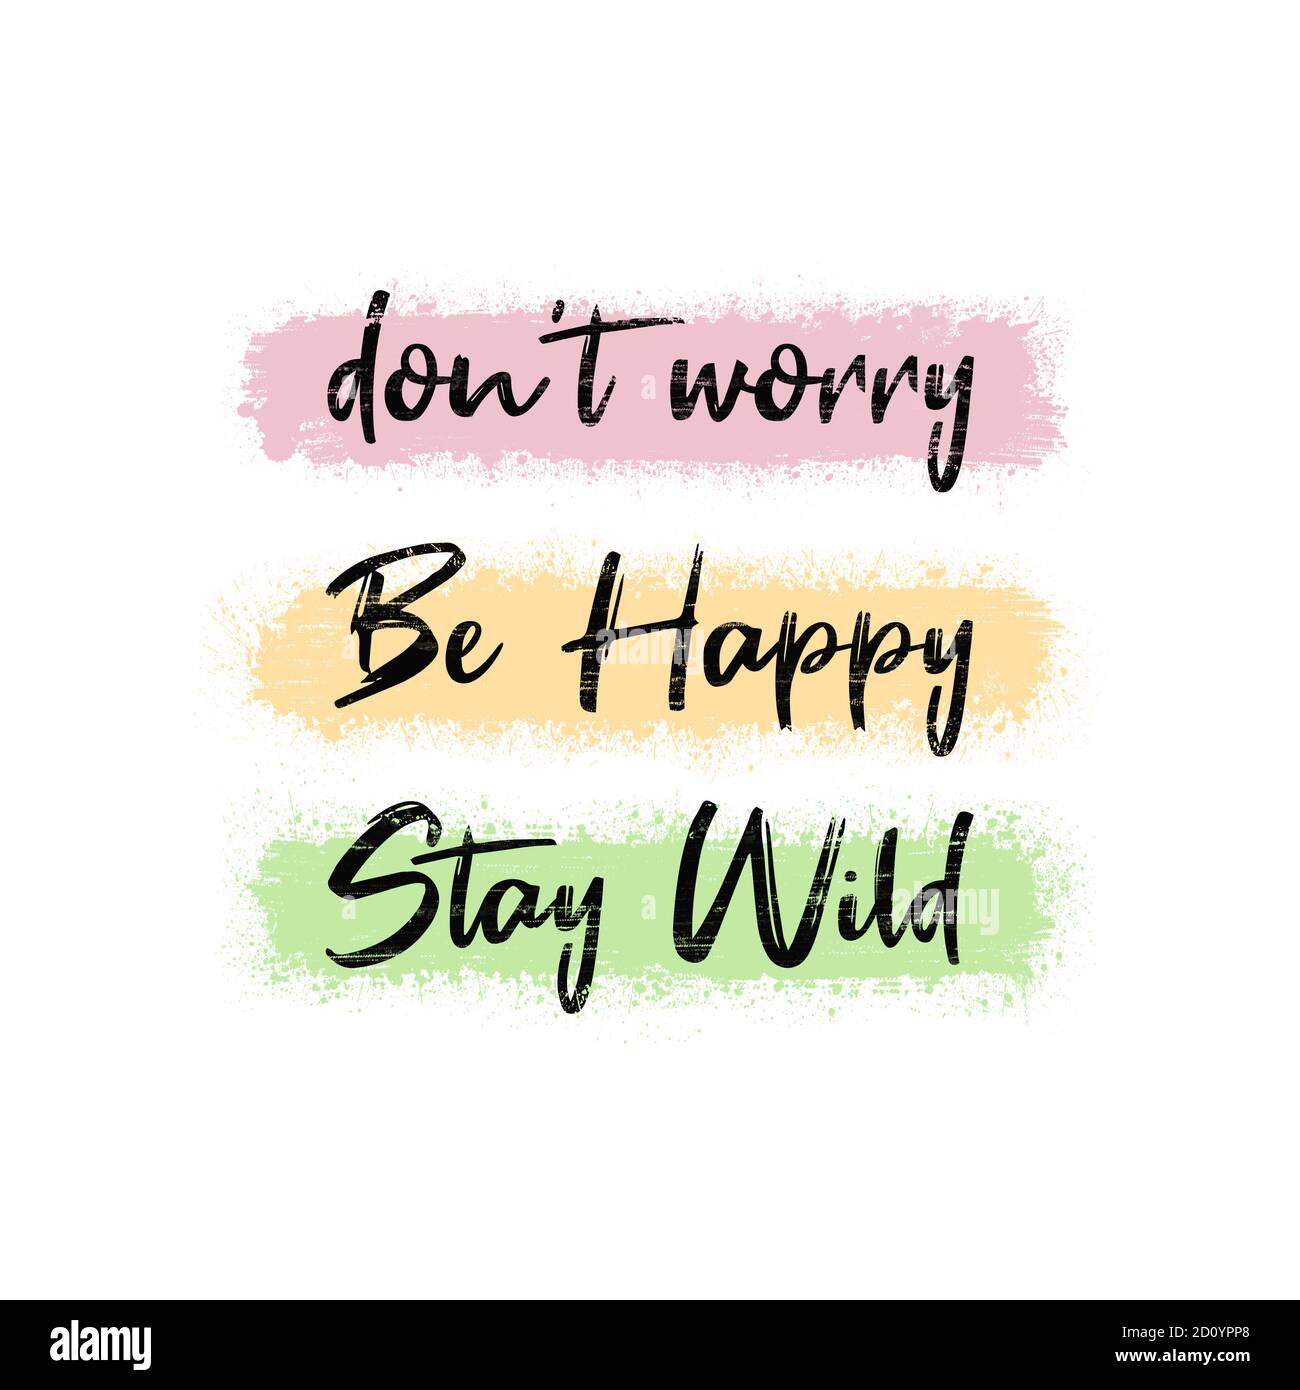 Don't worry, be happy, stay wild. Funny and positive text art, colorful inspiring and motivational illustration. Modern hipster lettering design, comi Stock Photo